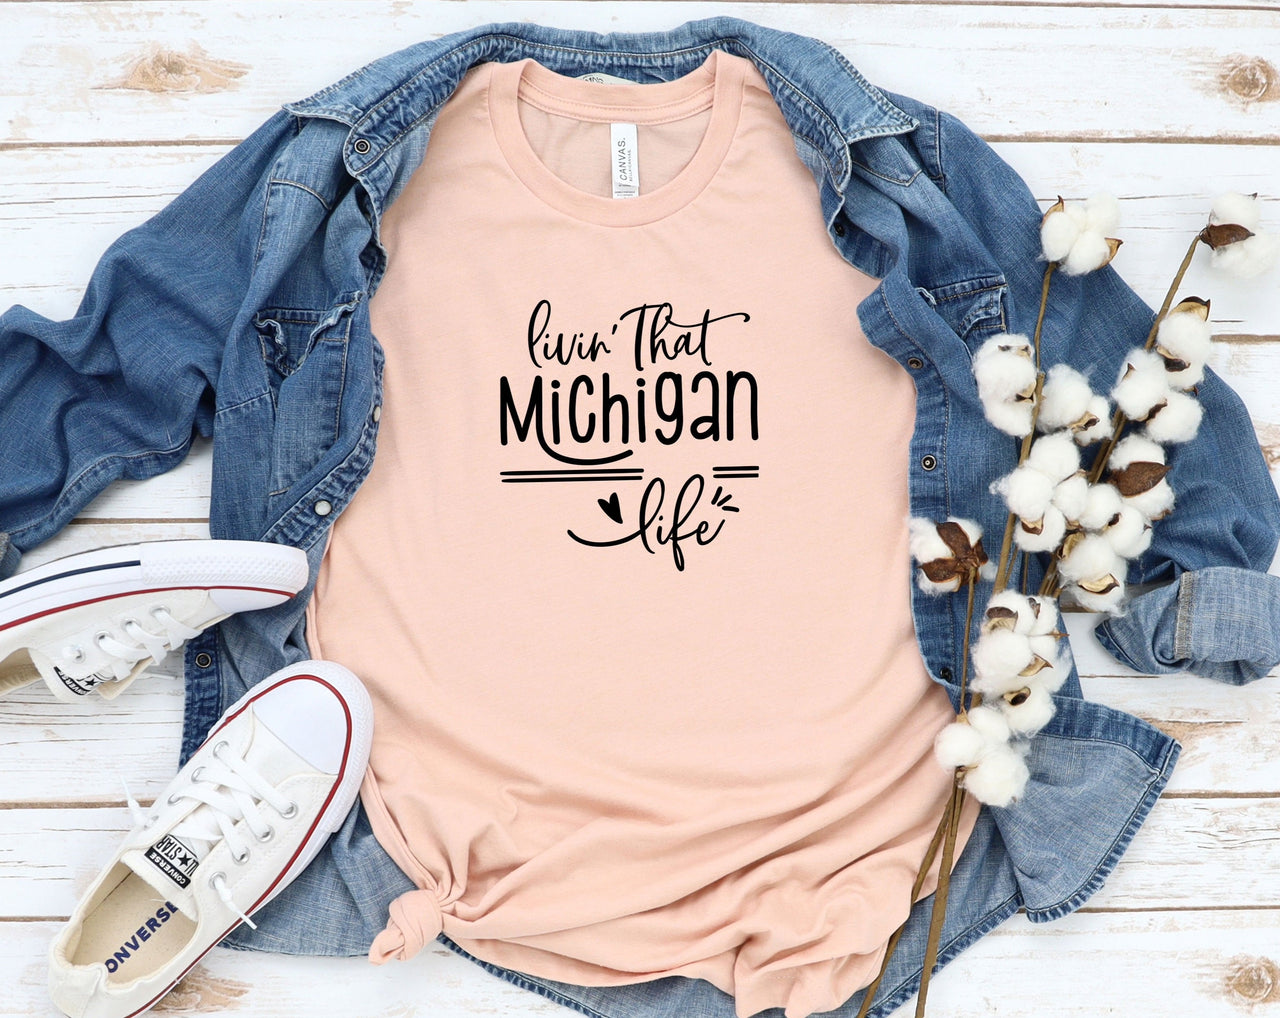 "Livin' That Michigan Life" Short-Sleeved Unisex Tee (available in all colors)